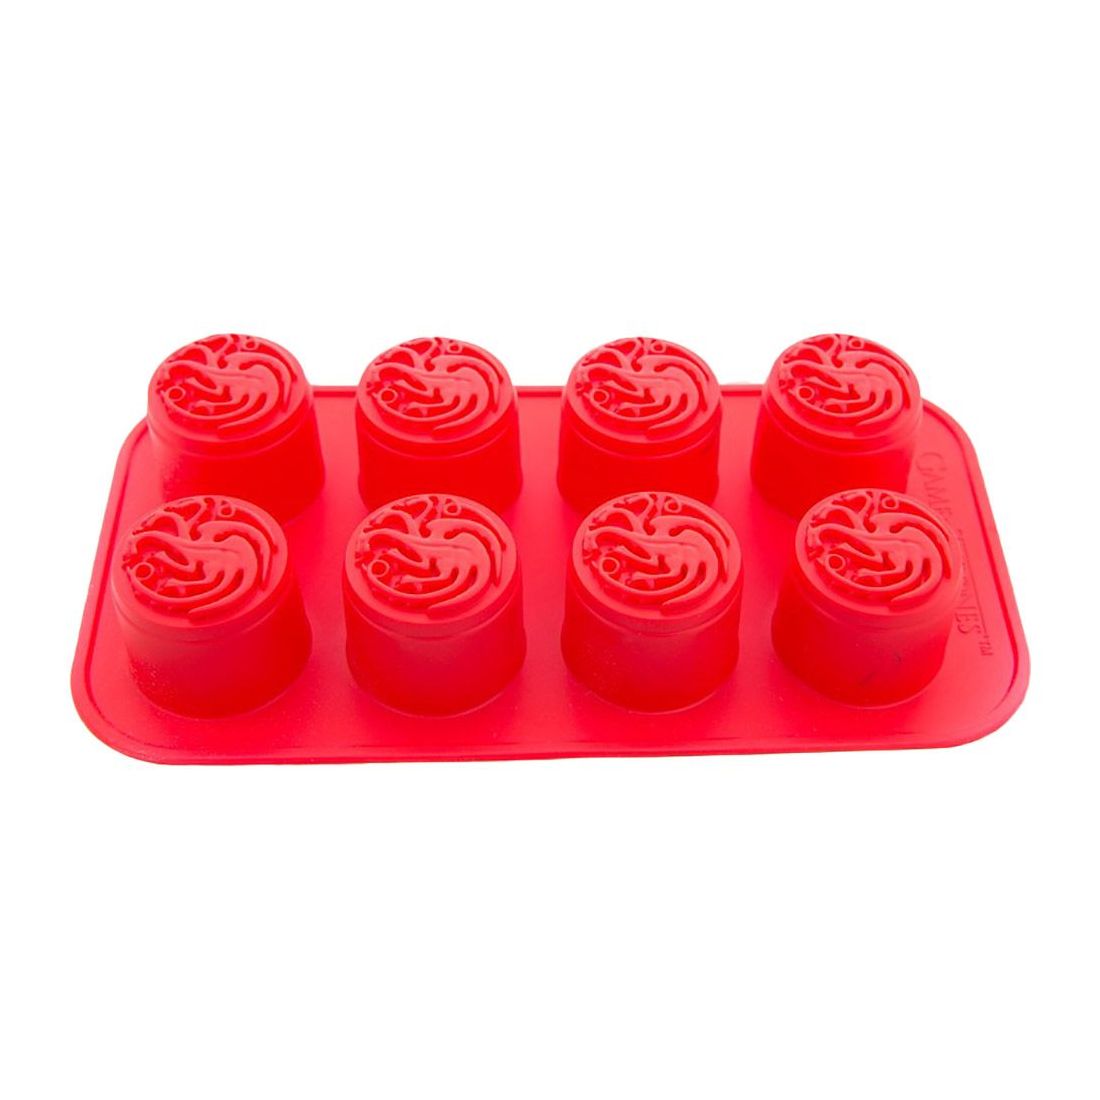 Time City Game Of Thrones Targaryen Logo Silicone Ice Mould